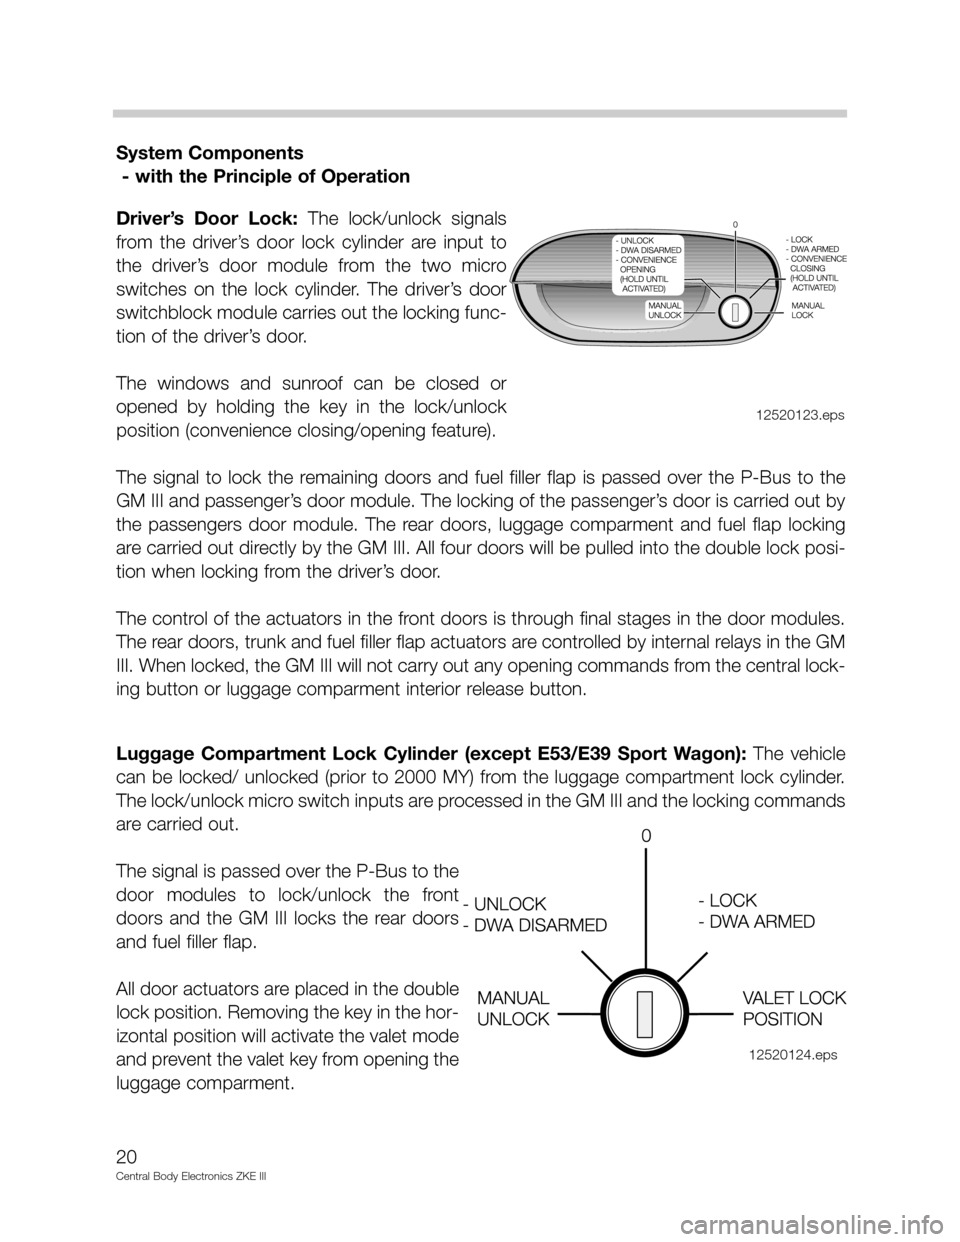 BMW 750IL 2001 E38 Central Body Electronics ZKE Manual System Components 
- with the Principle of Operation
Driver’s  Door  Lock: The  lock/unlock  signals
from  the  driver’s  door  lock  cylinder  are  input  to
the  driver’s  door  module  from  